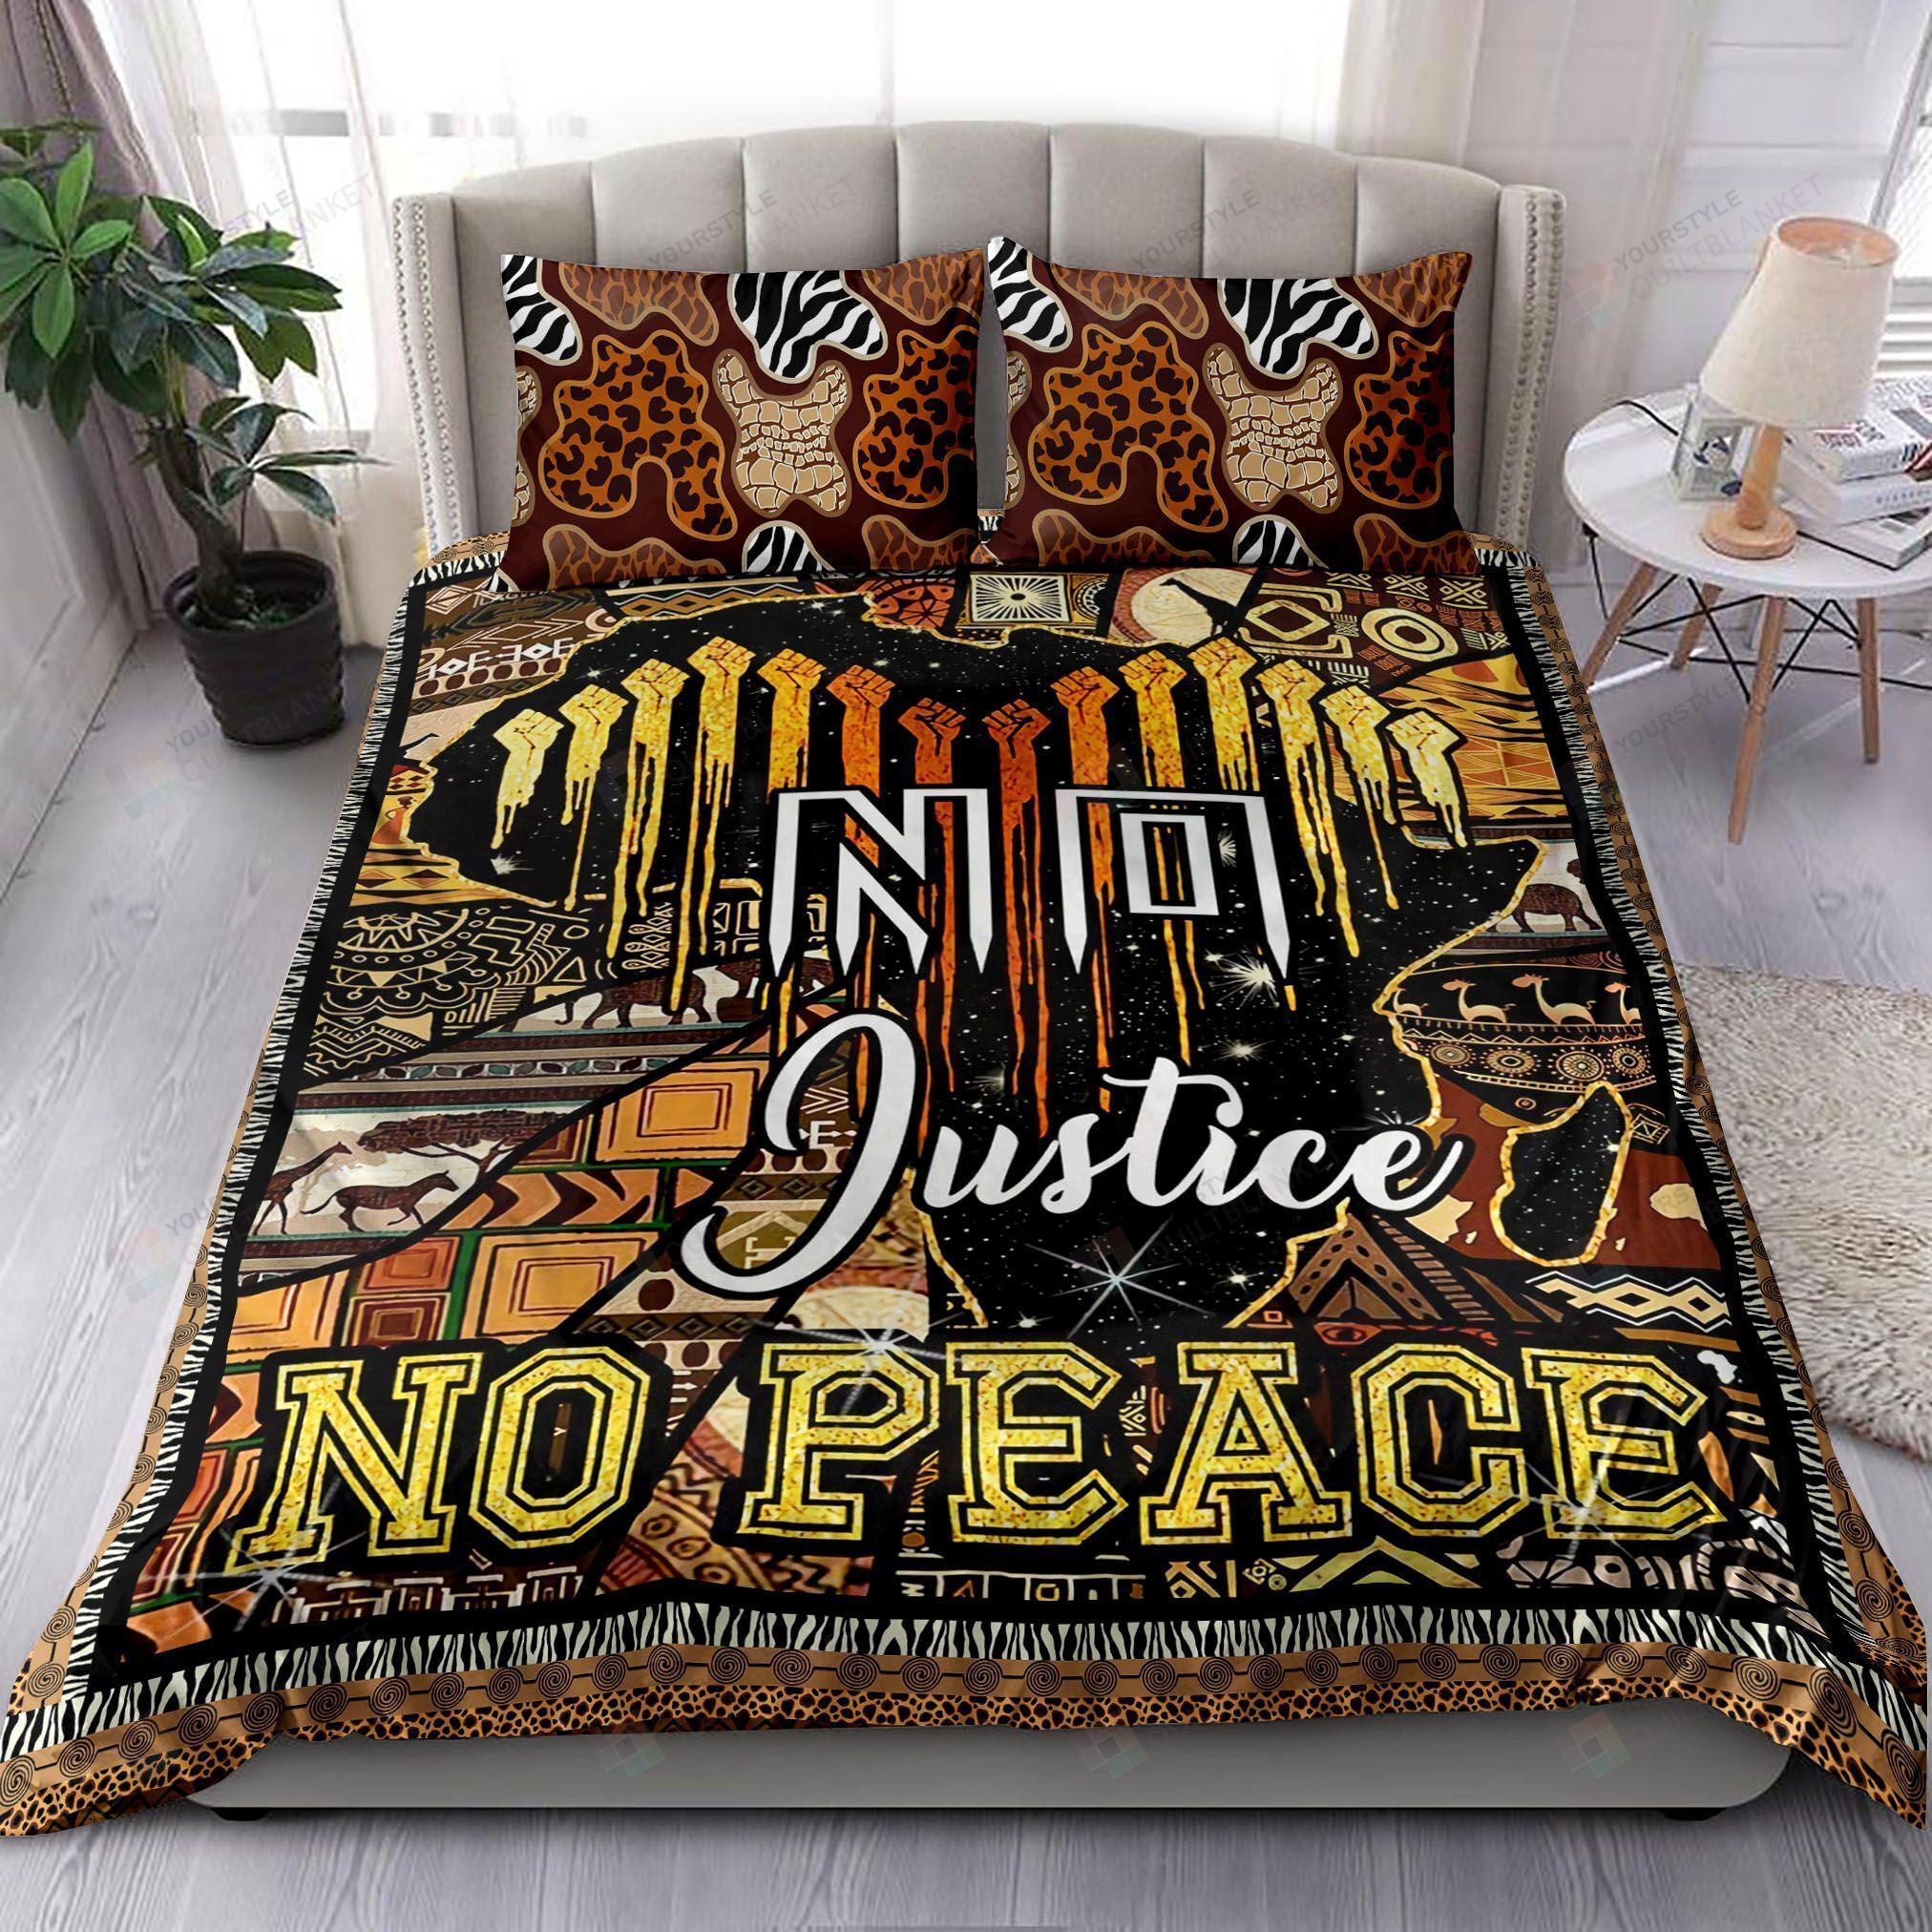 Africa No Justice No Peace Bedding Set Cotton Bed Sheets Spread Comforter Duvet Cover Bedding Sets